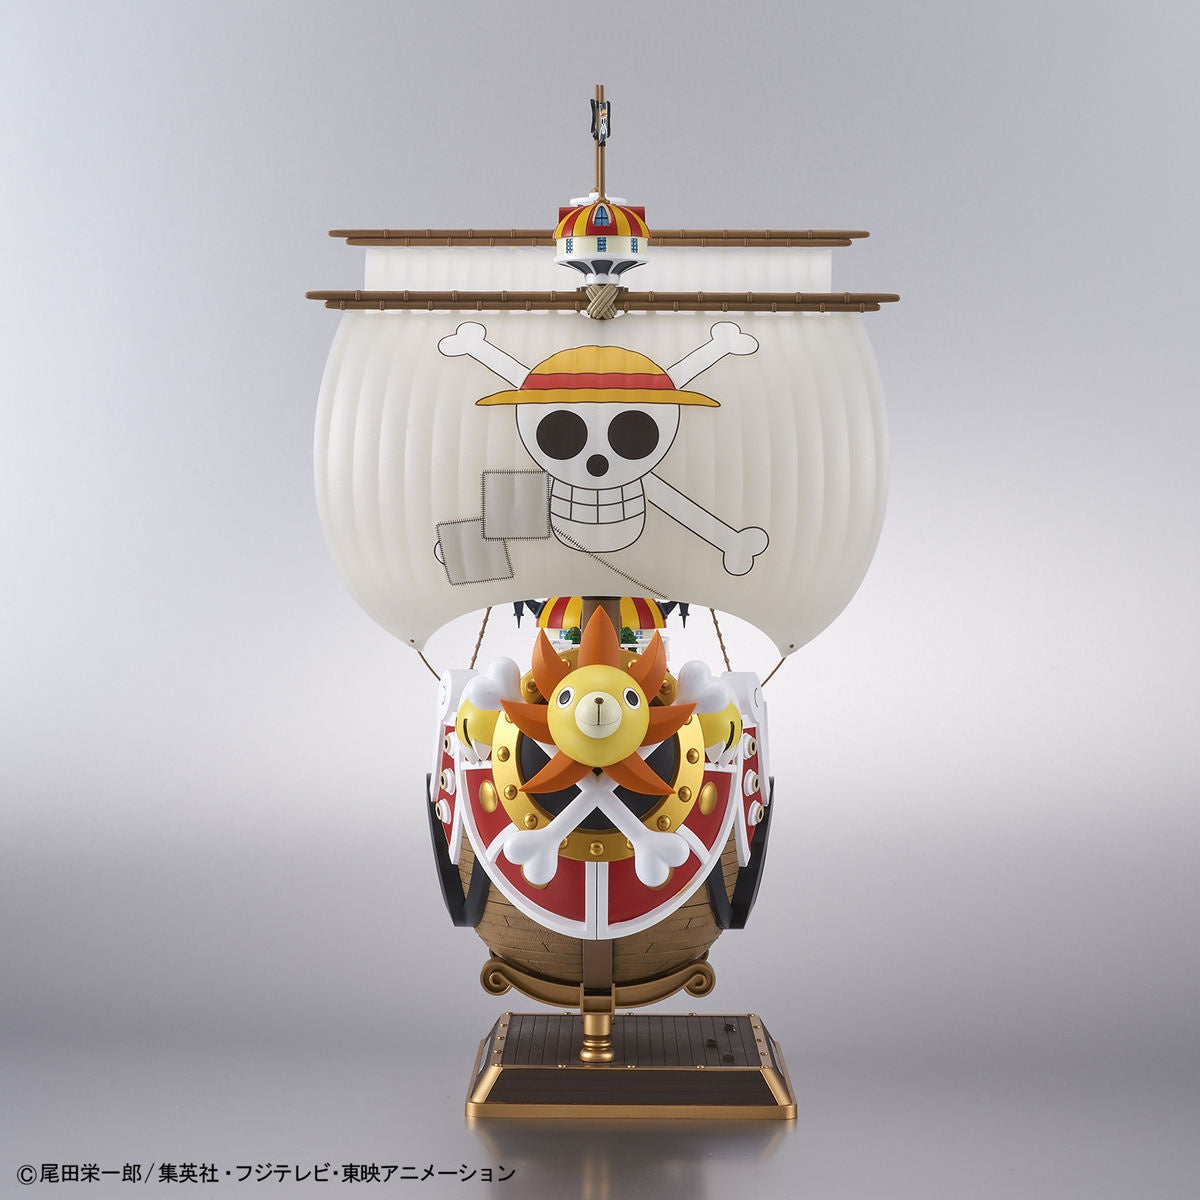 Who is Thousand Sunny in One Piece?